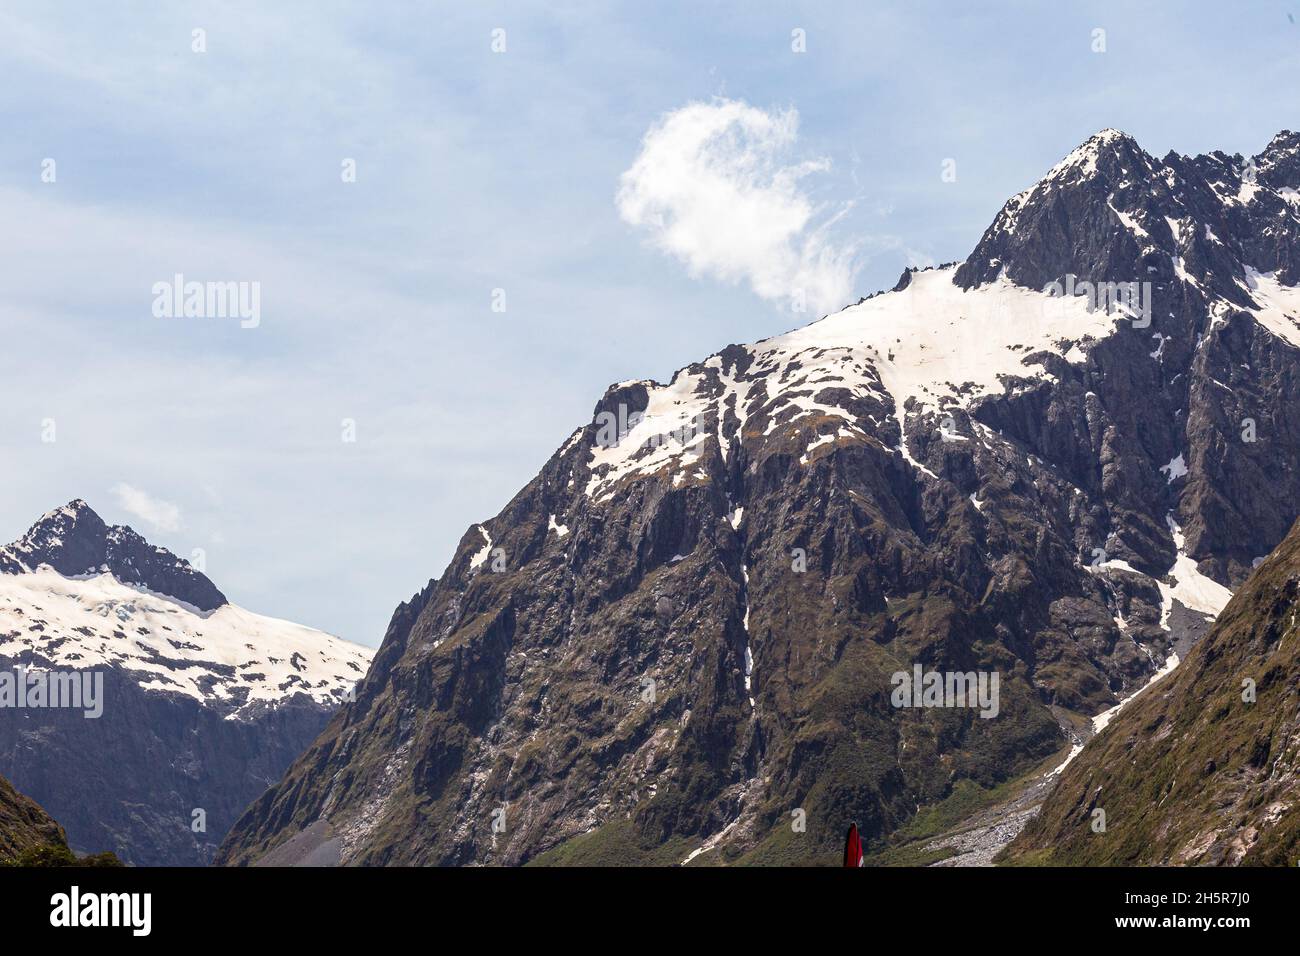 Snowy mountains and hills of South Island, New Zealand Stock Photo